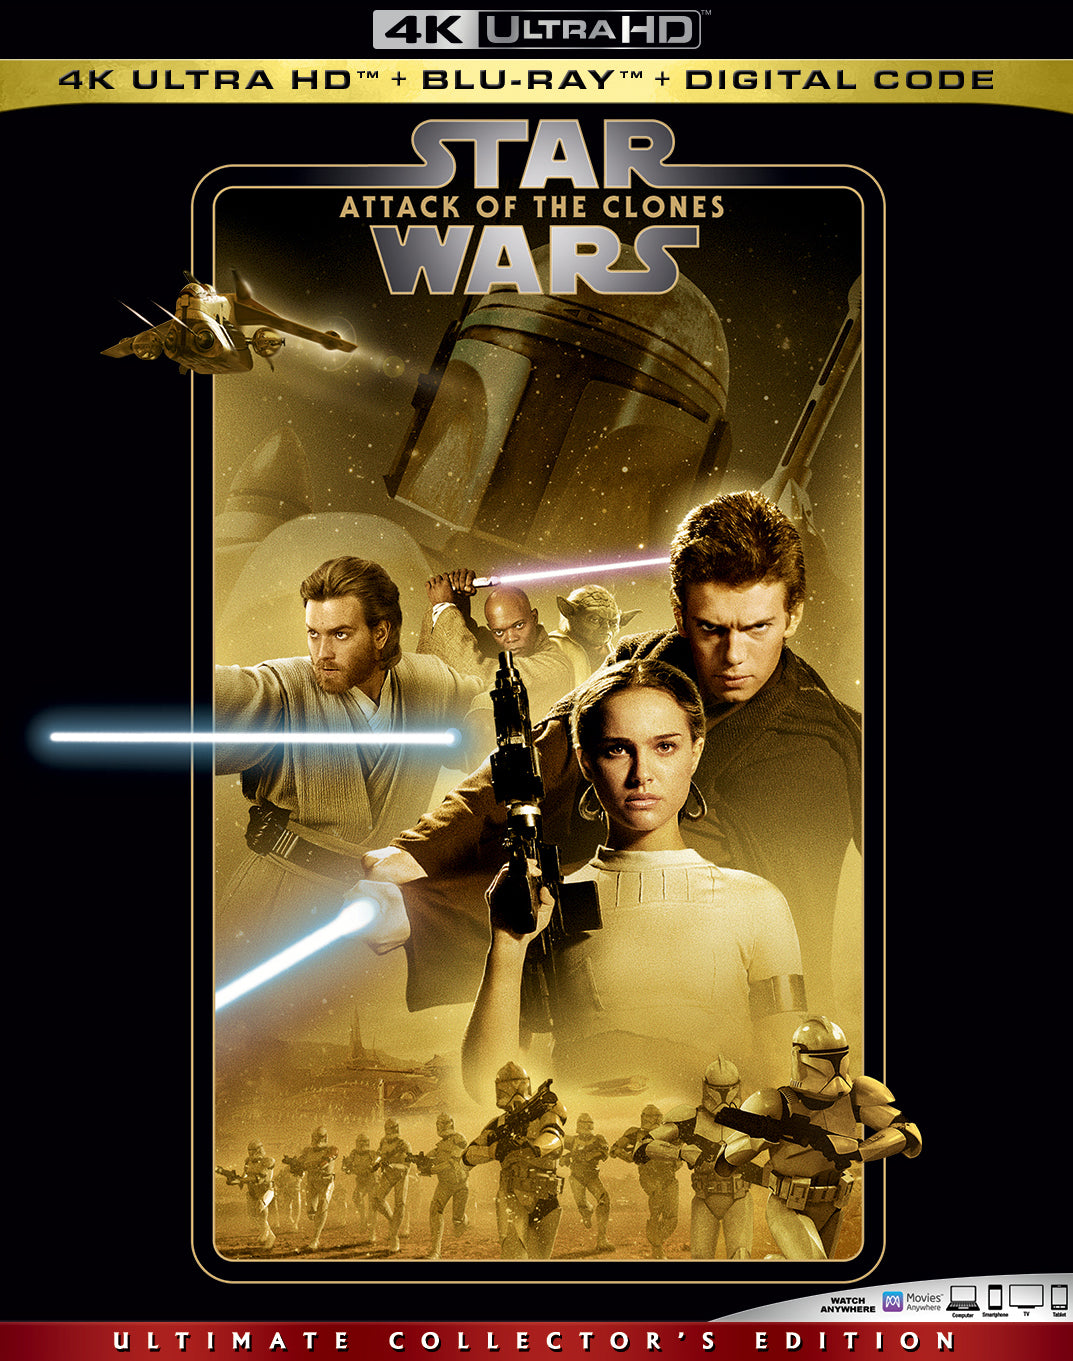 Star Wars: Attack of the Clones [Includes Digital Copy] [4K Ultra HD Blu-ray/Blu-ray] cover art